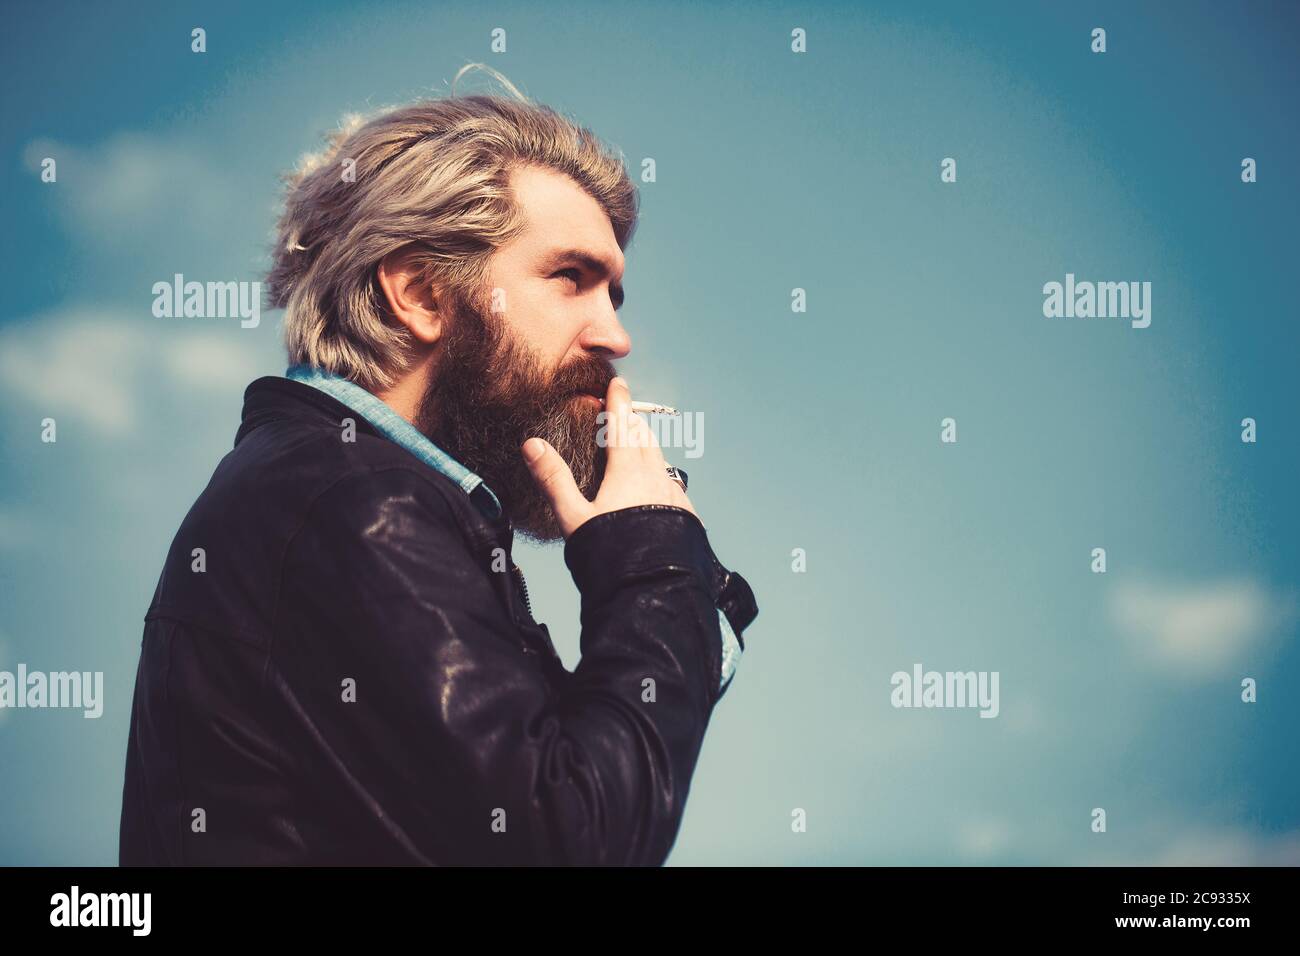 Face of a middle aged man smoking a cigarette and looking thoughtful. Set against a blue sky. Stock Photo